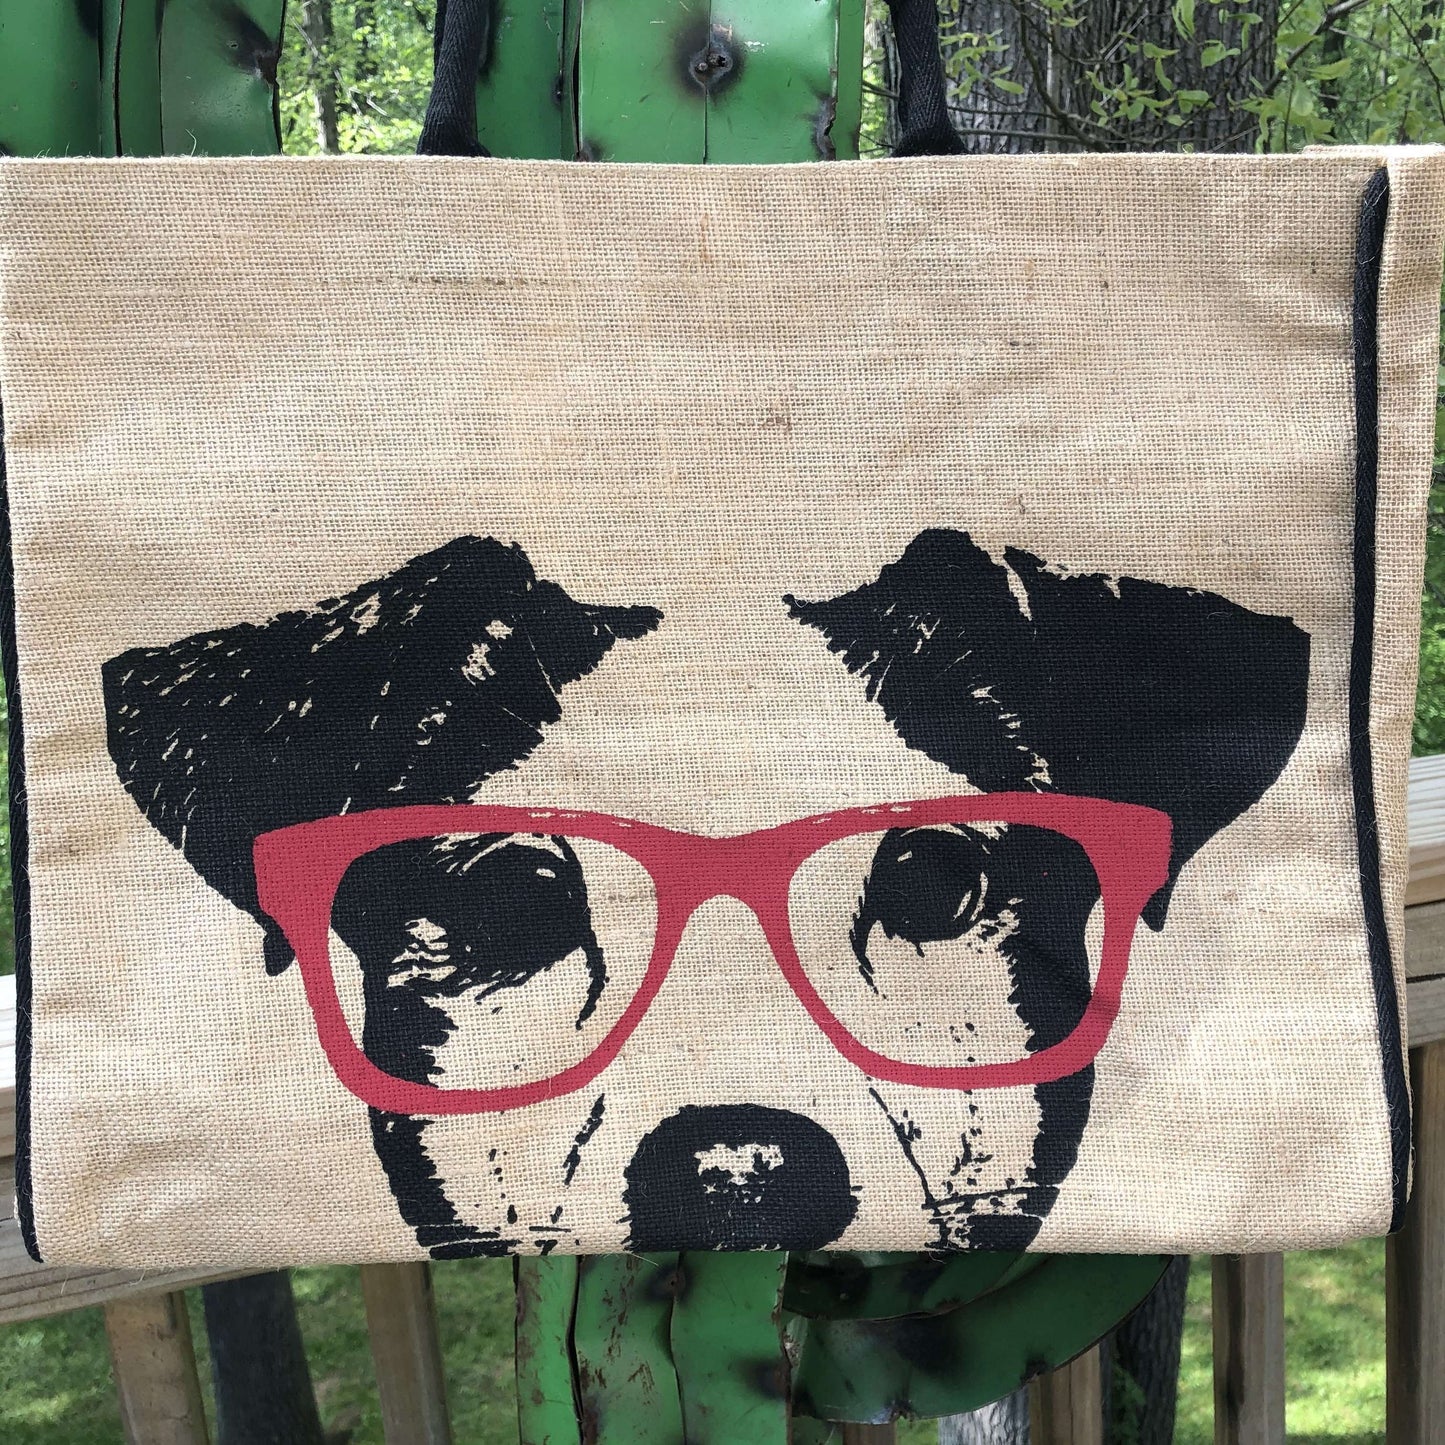 Adorable Cat, Dog & Sunflower Totes